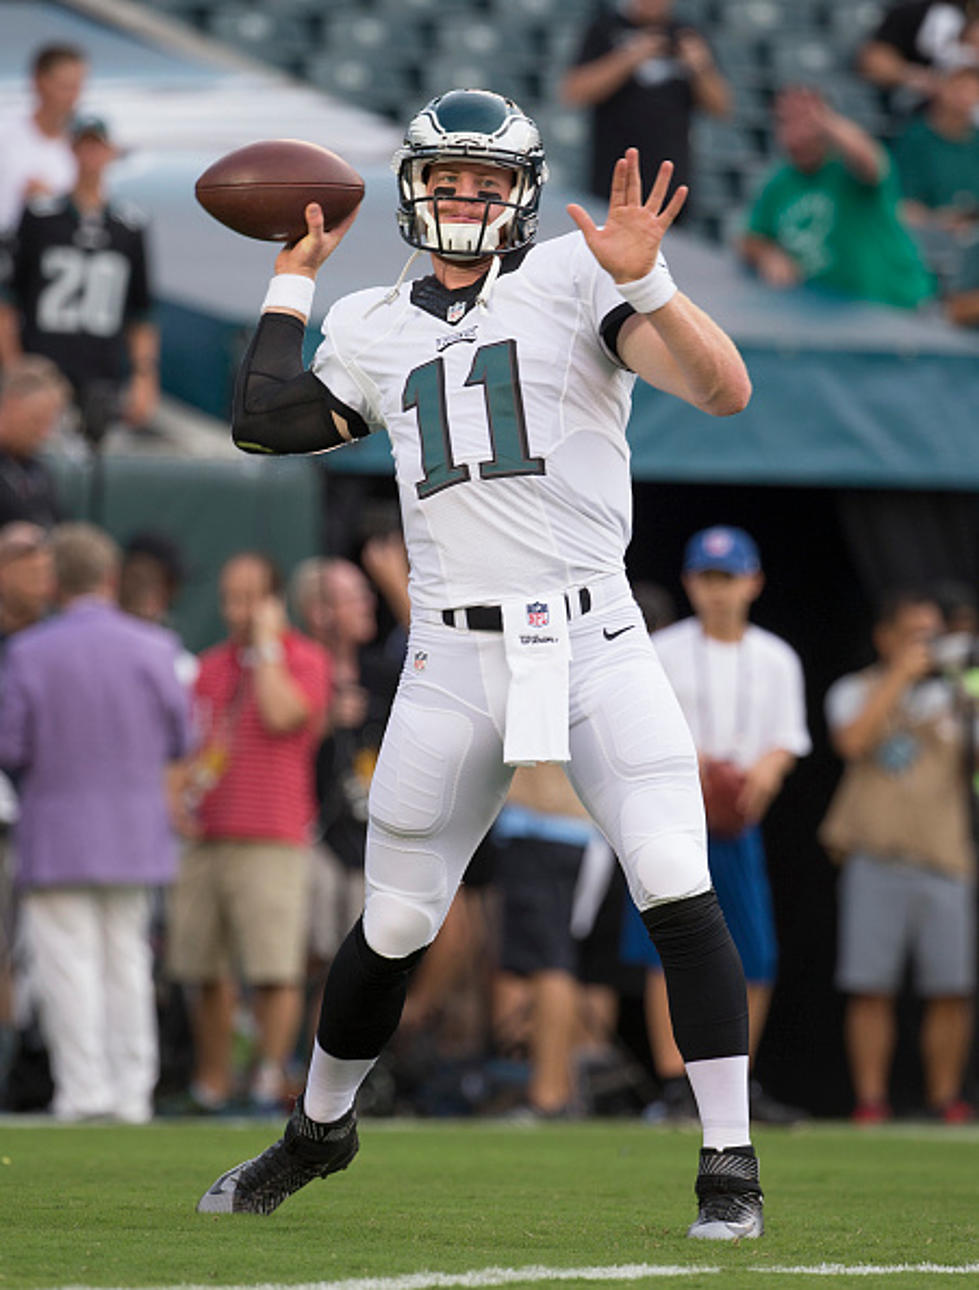 What Should Be Expected From Rookie Carson Wentz?